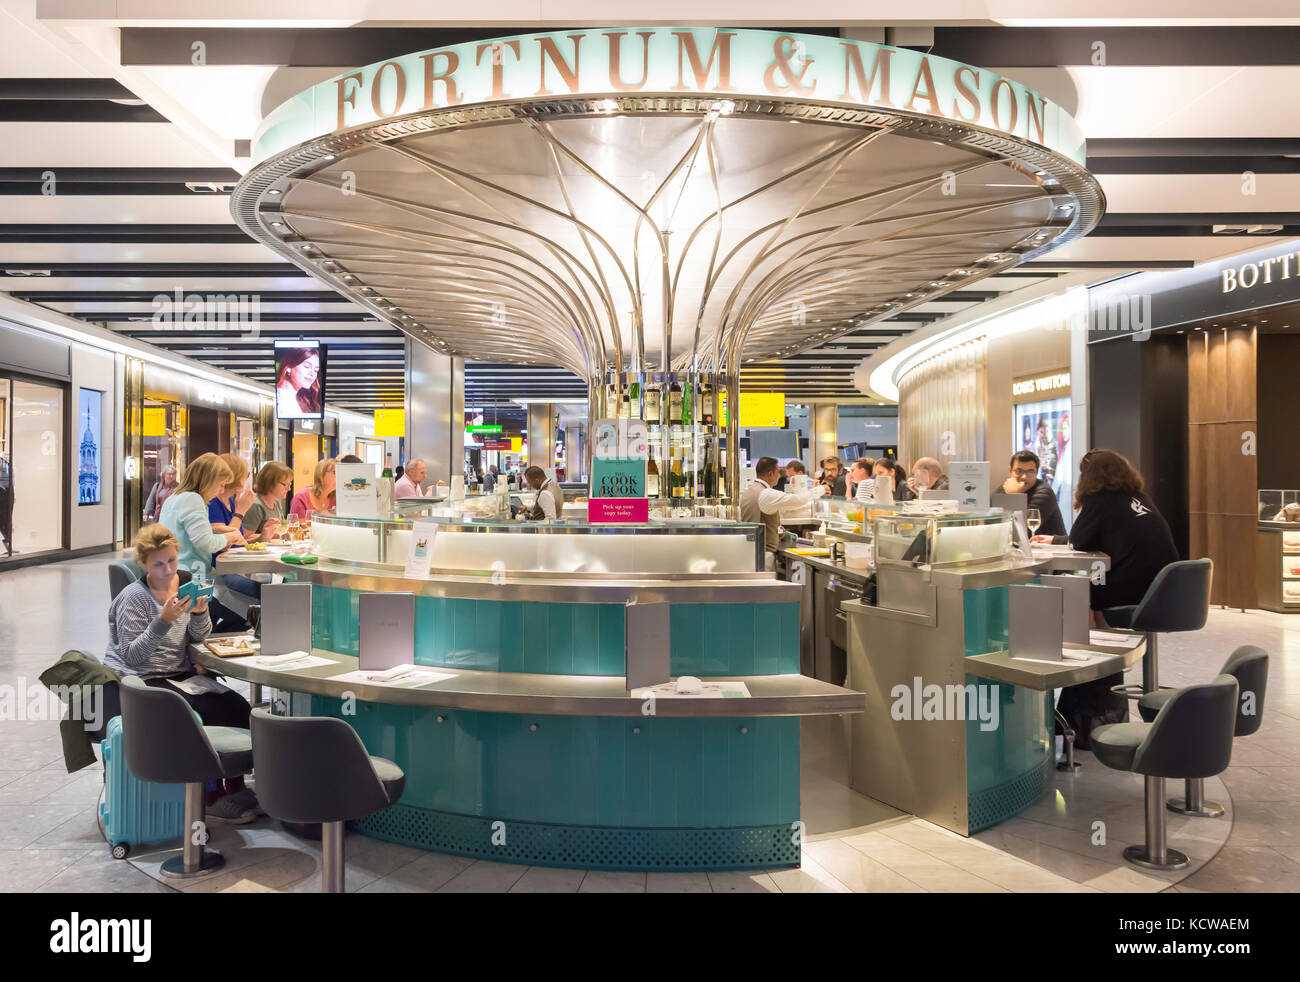 Fortnum & Mason food bar in Departure Lounge at Terminal 5, Heathrow Airport. London Borough of Hounslow, Greater London, England, United Kingdom Stock Photo